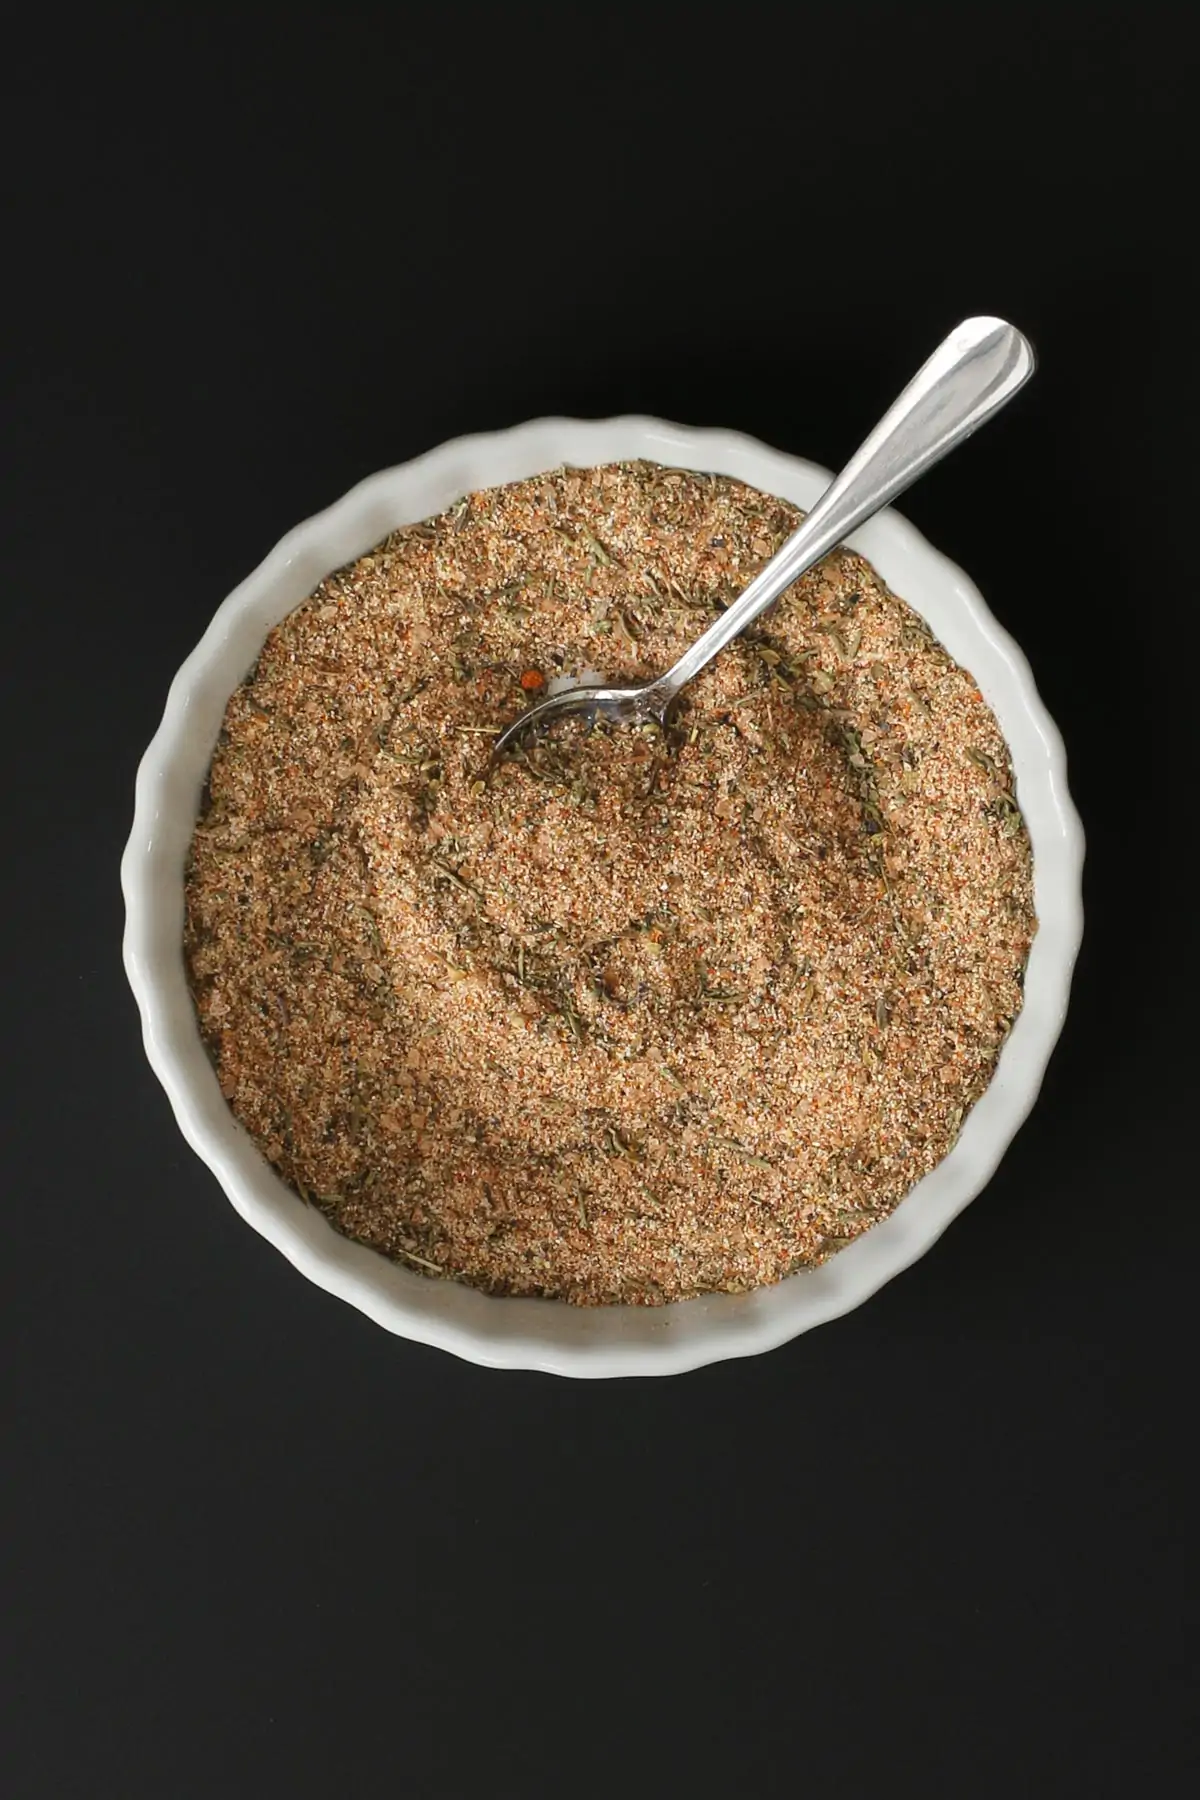 cajun spice blend in a dish with a spoon.